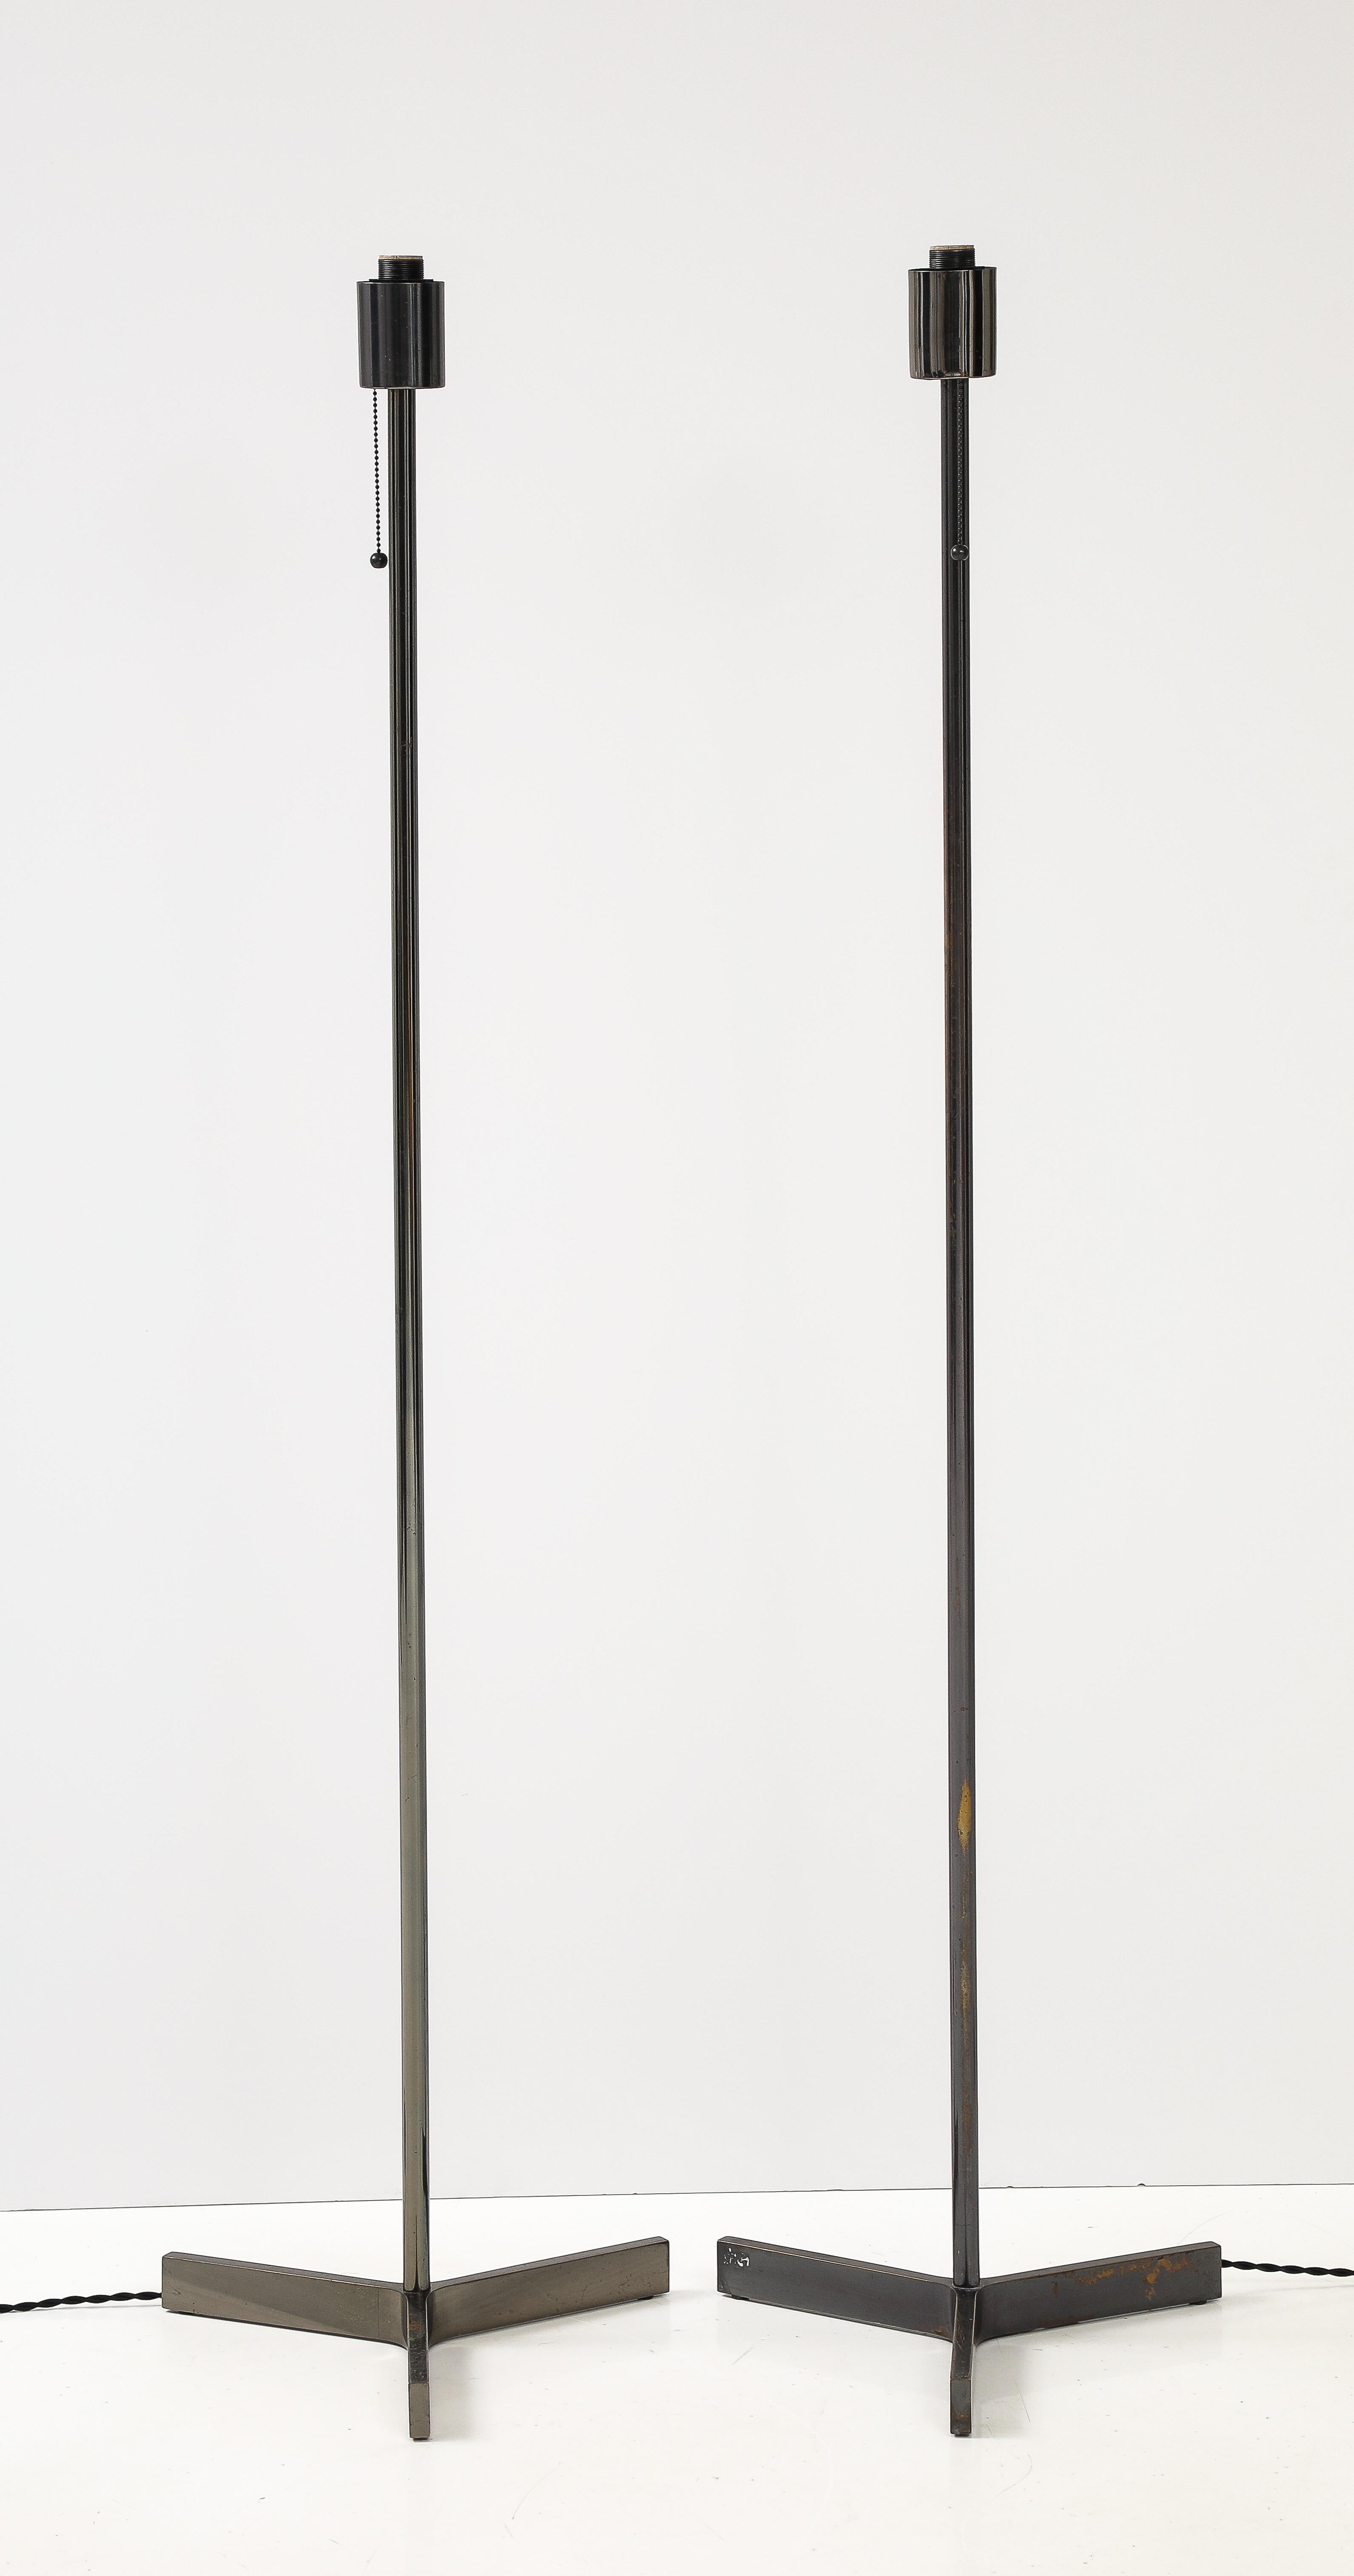 May be sold individually.

These modern chrome floor lamps are made more beautiful by their age; small areas of patination to the metal place them in the 60s and bring warmth to the design, disrupting the clean lines and shining finish.

These lamps